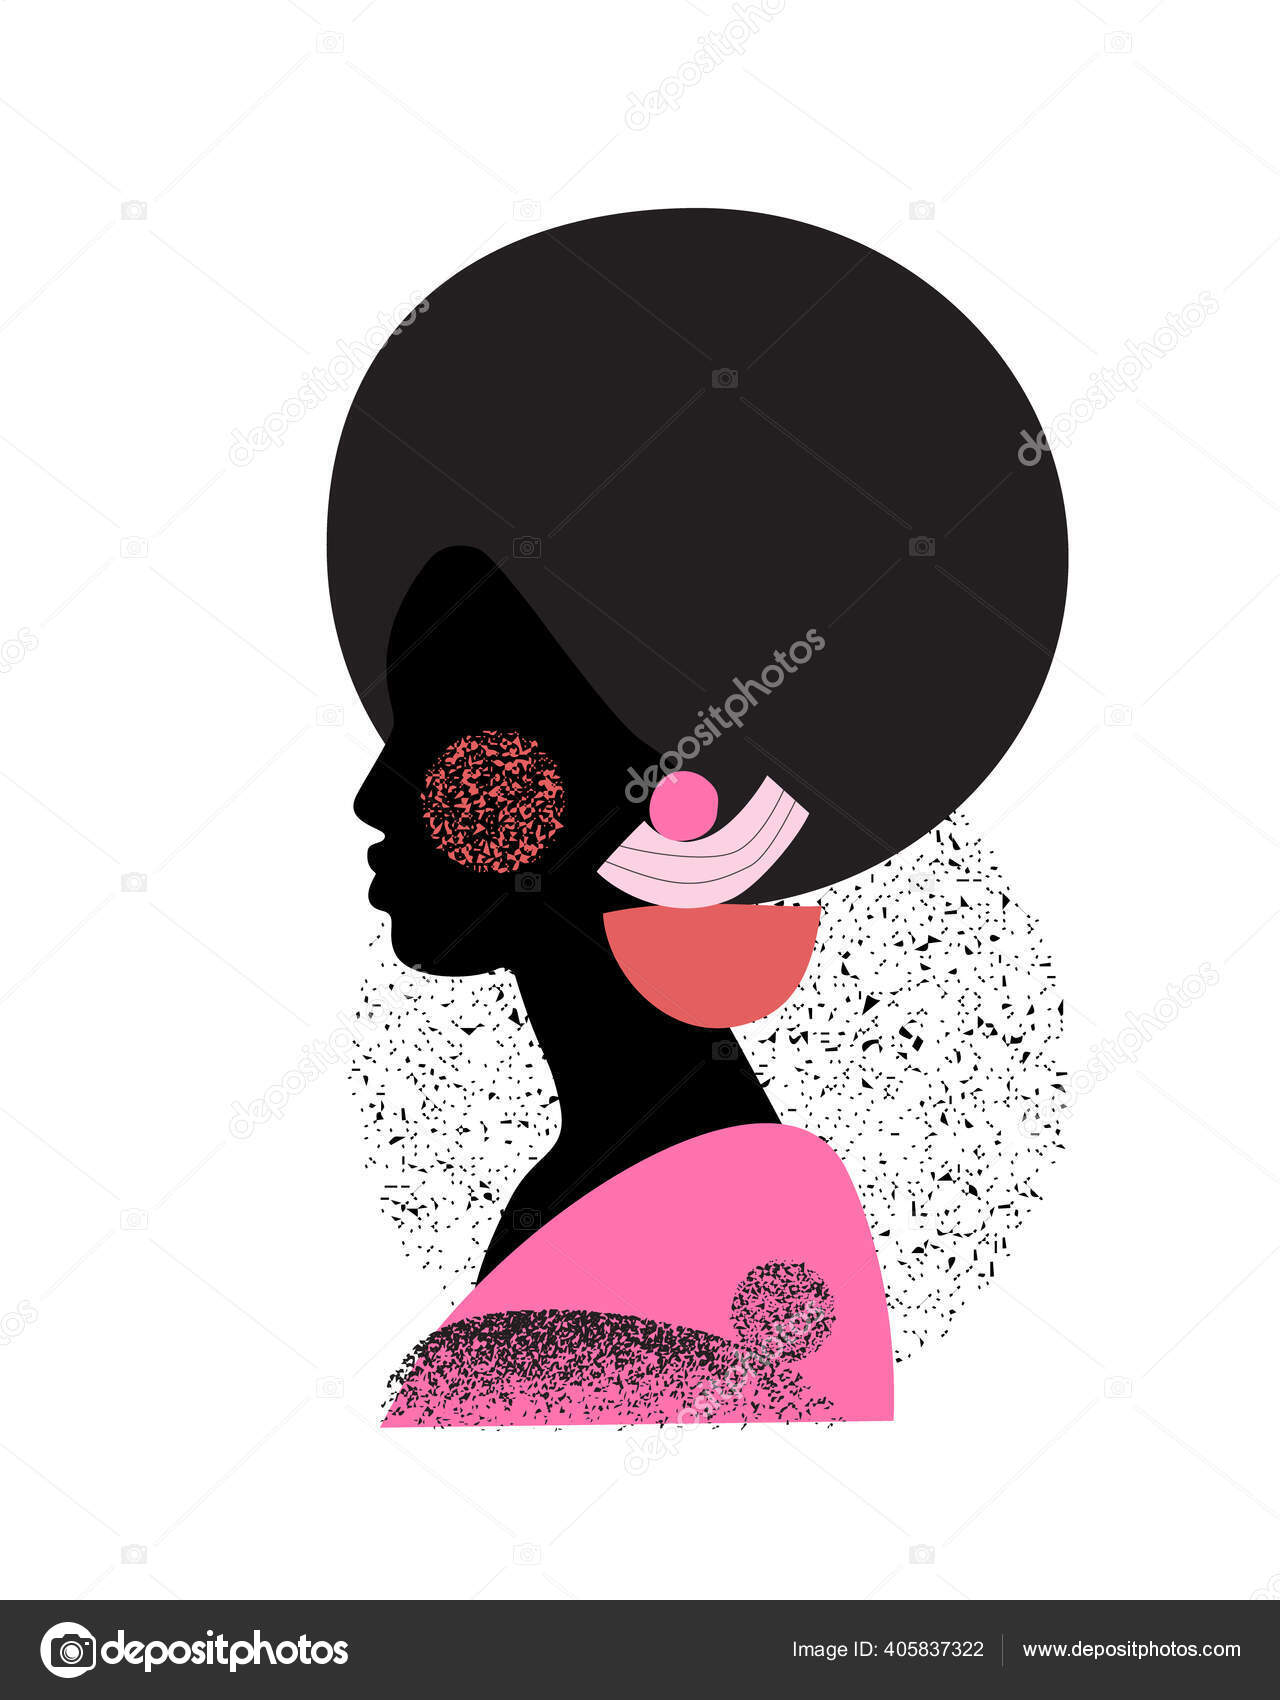 Avatar people face for user icon vector with  Stock Illustration  92611381  PIXTA